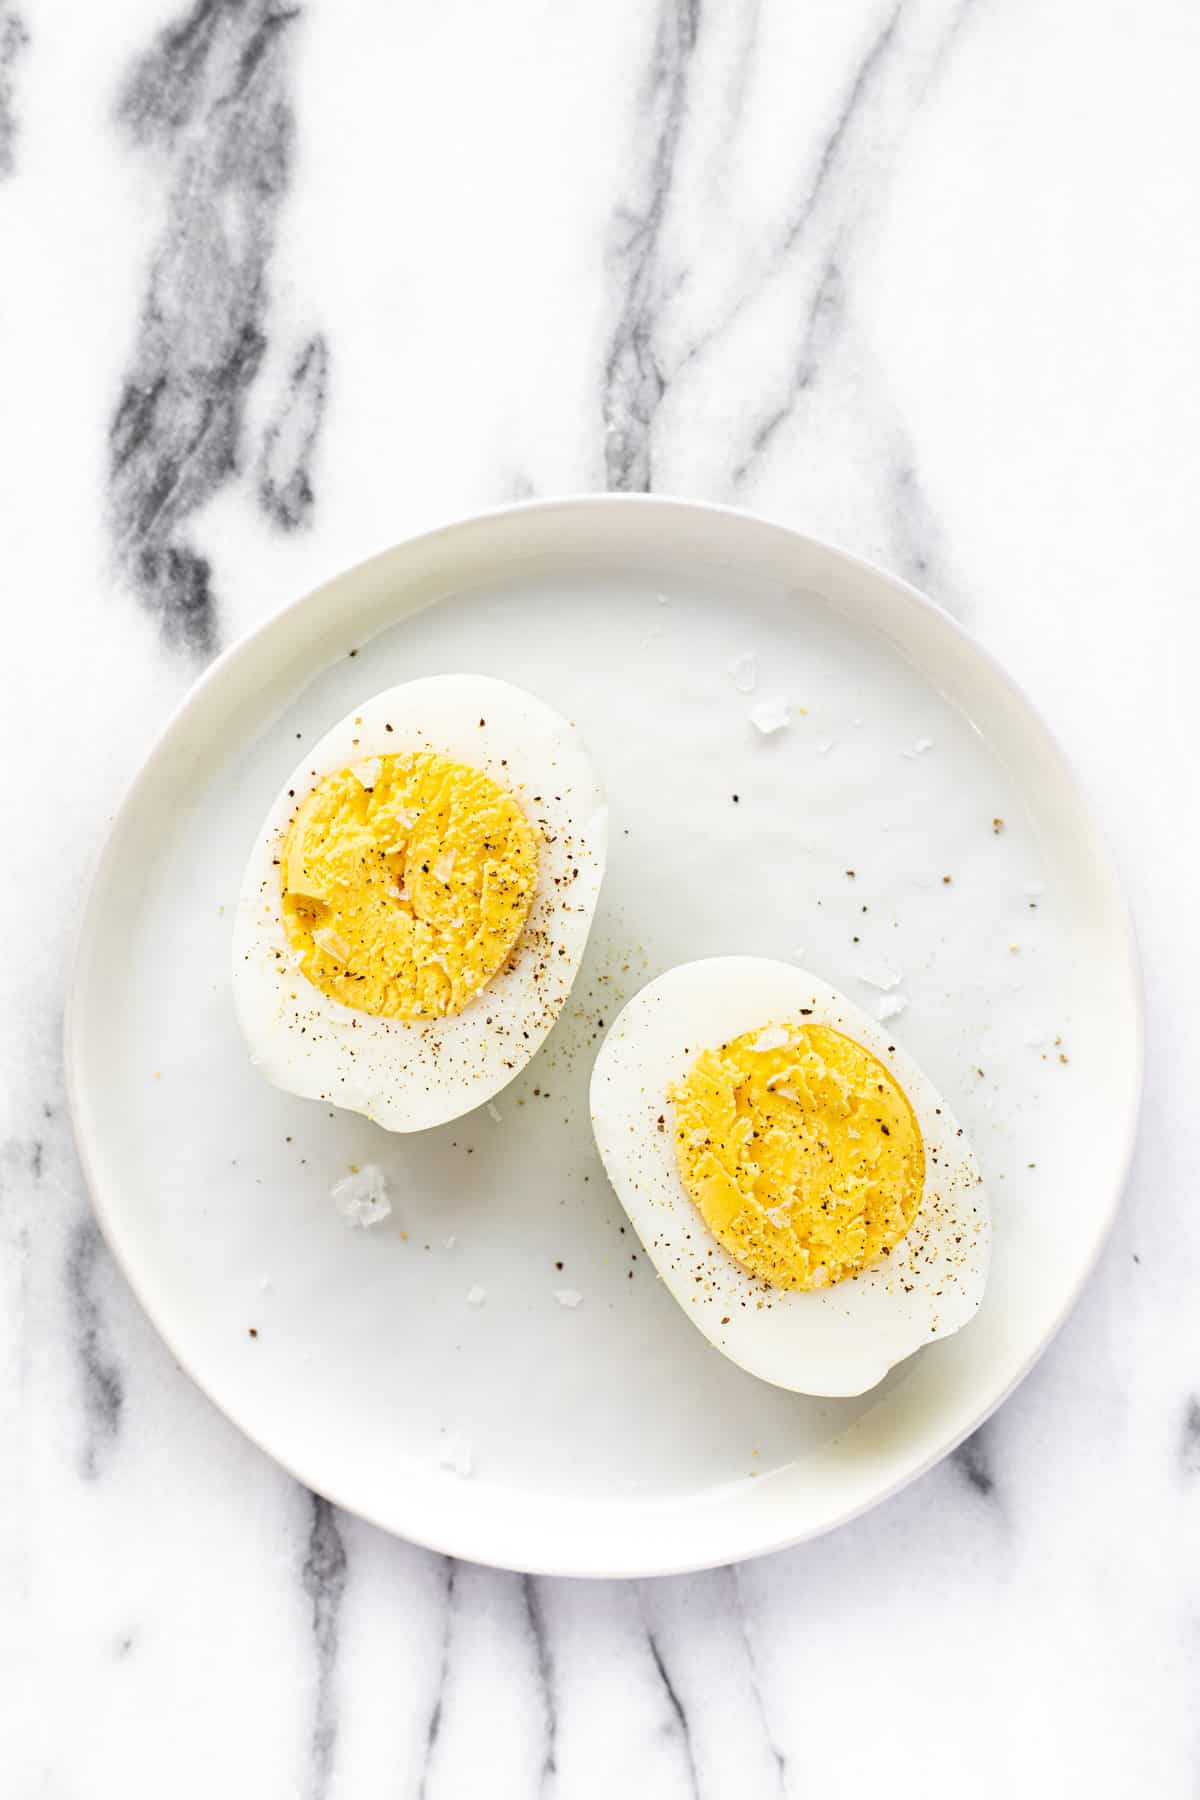 How to Make Hard Boiled Eggs in Air Fryer - Midwest Foodie